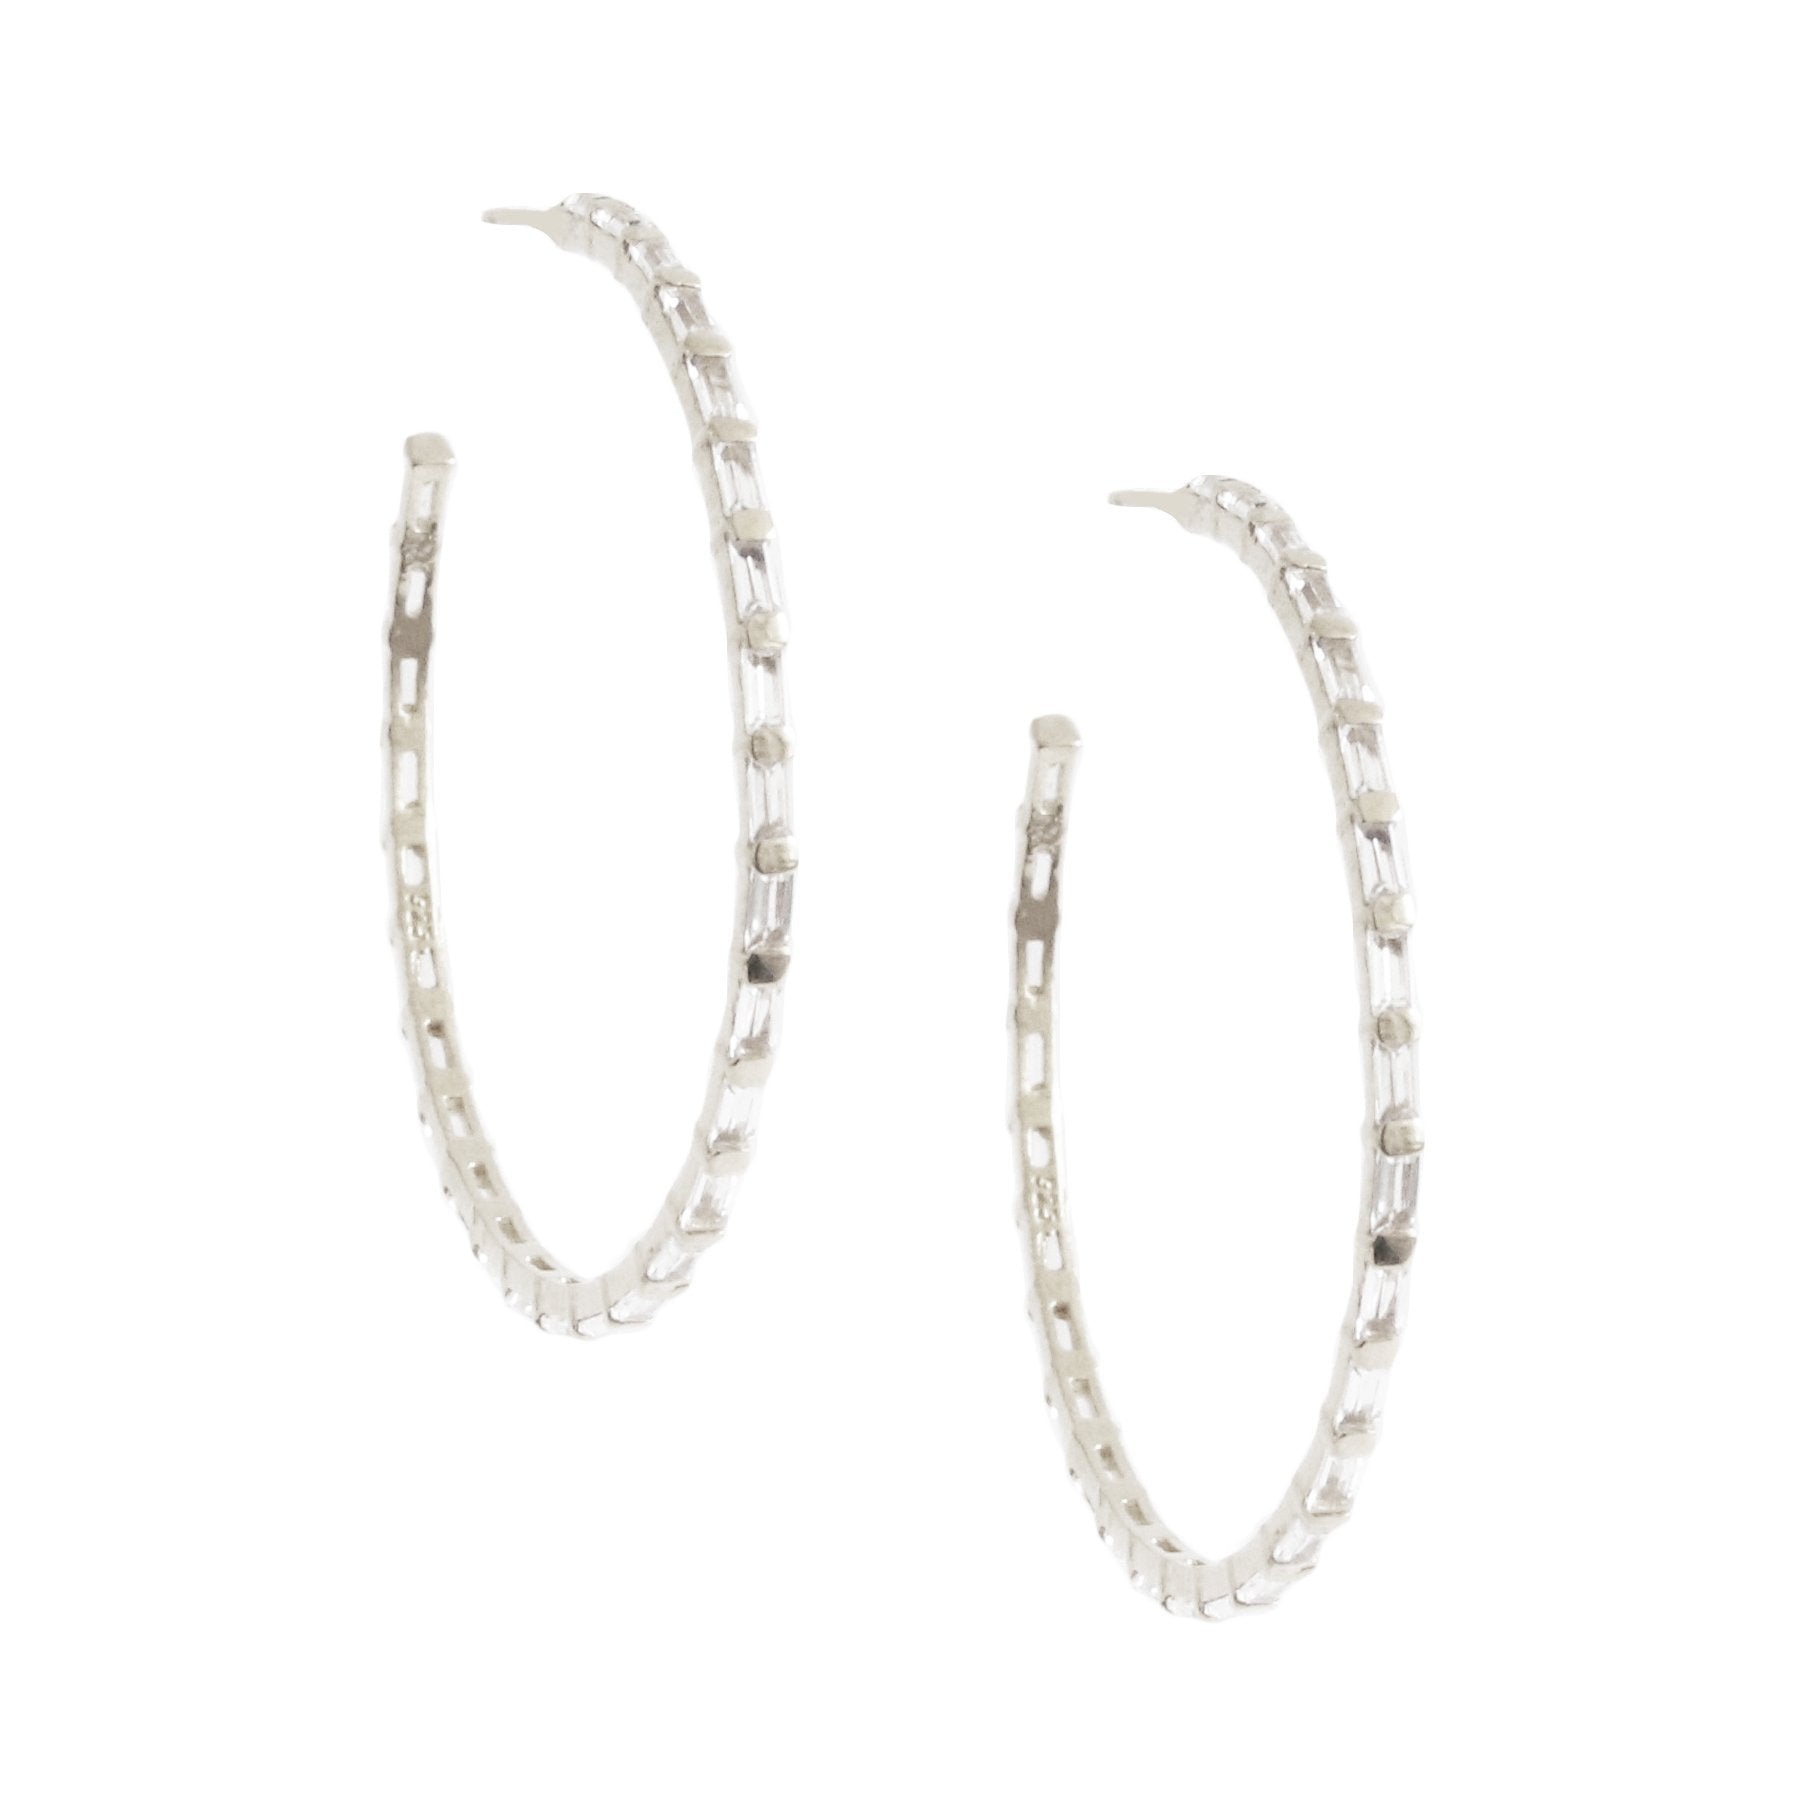 Loyal Studded Large Hoops - White Topaz & Silver - SO PRETTY CARA COTTER